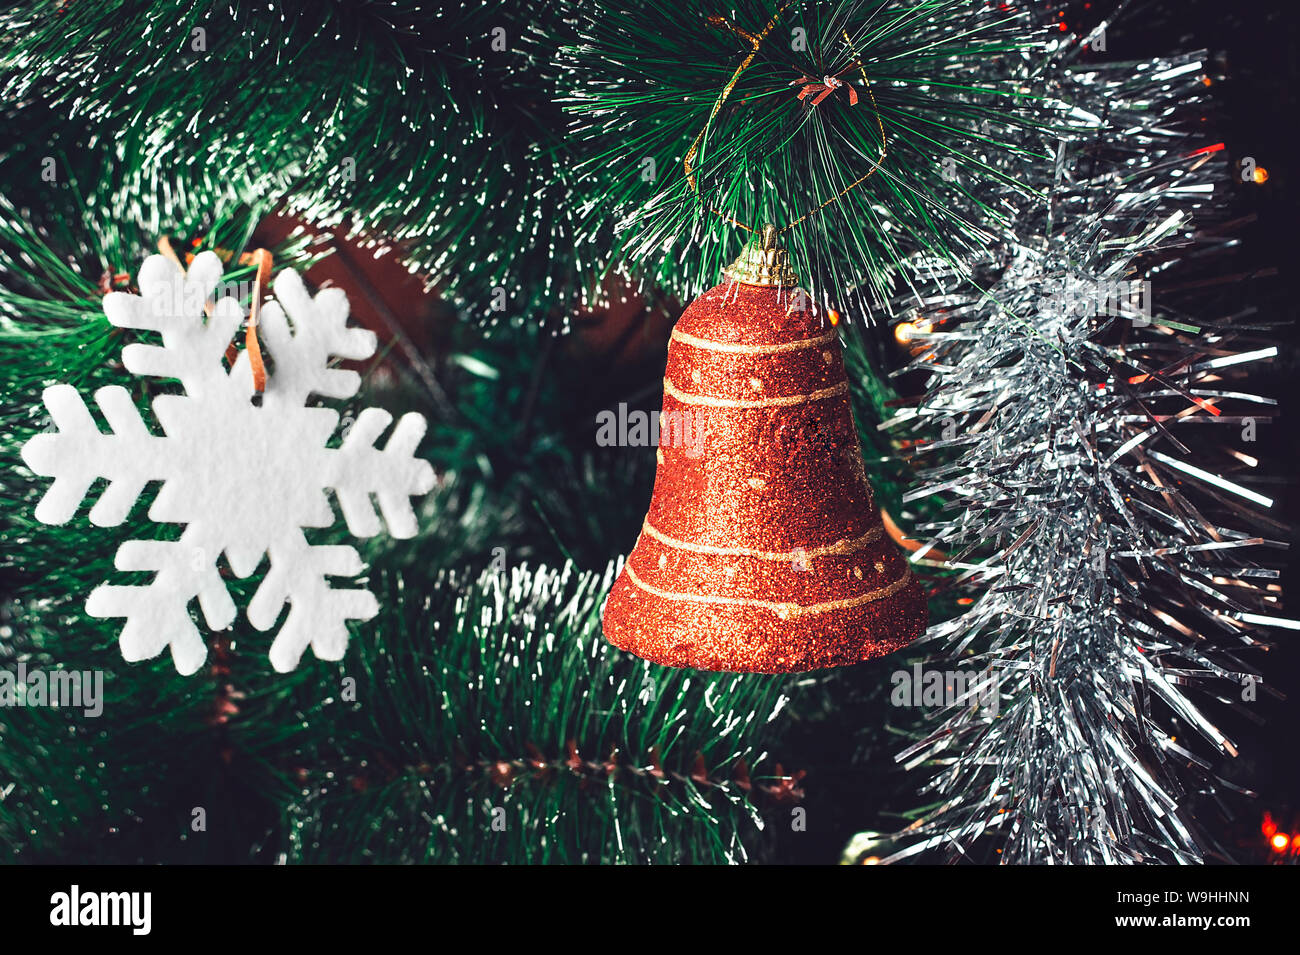 Christmas Tree Decorations: Red Orange Bell, White Snowflake, Shining Silver Tinsel on Green Needles with White Tips. Happy New Year and Christmas Con Stock Photo